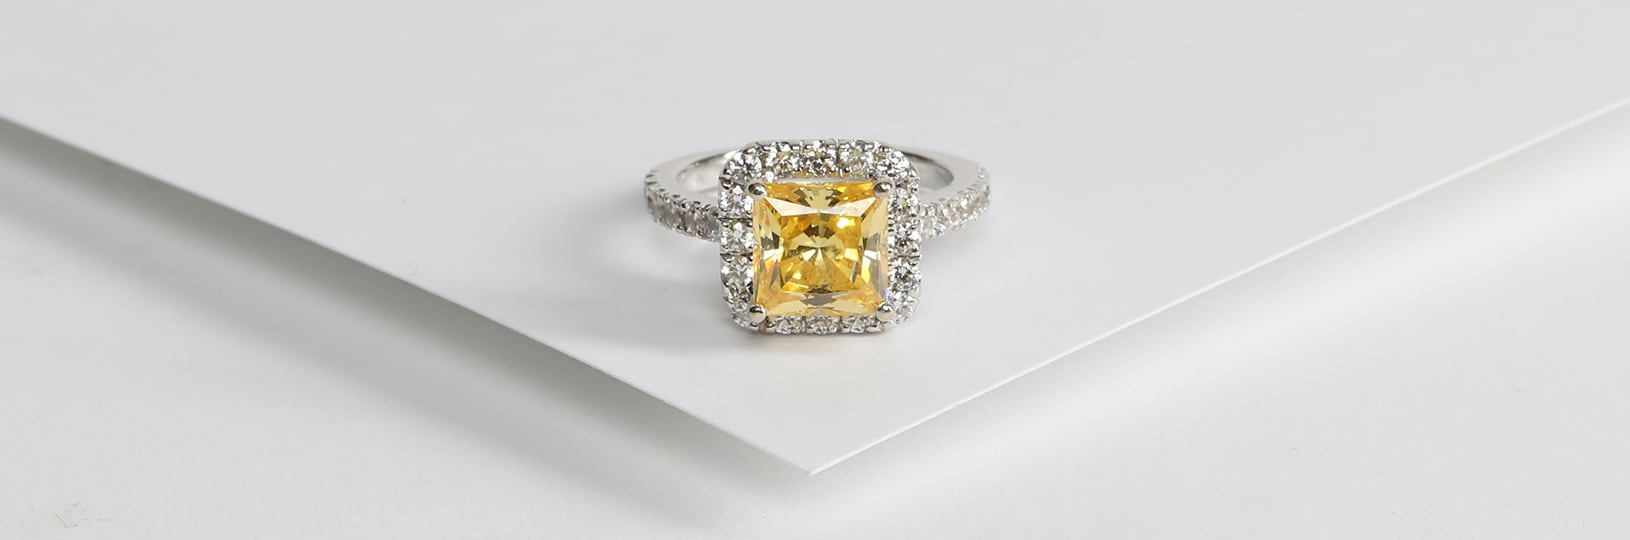 Canary engagement ring